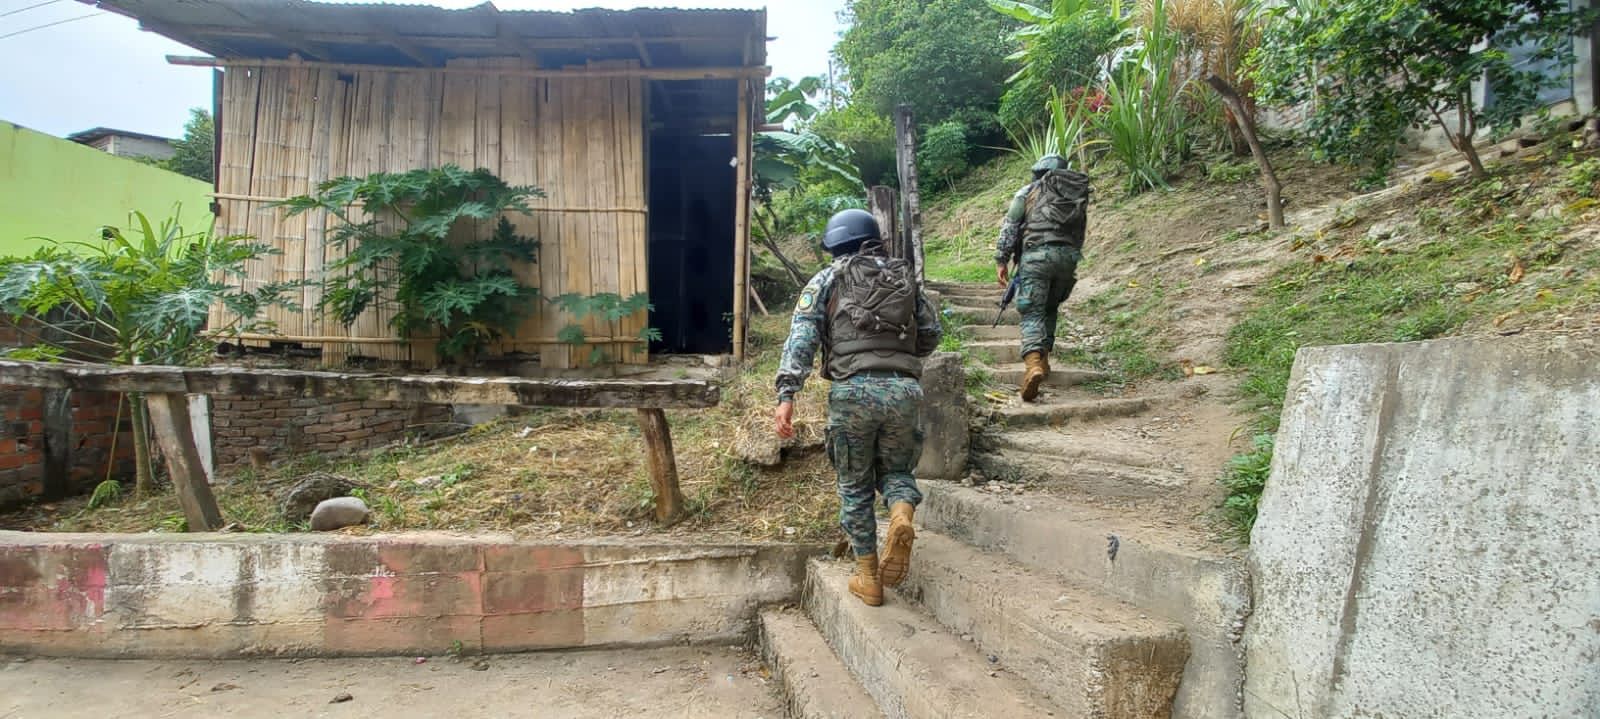 Ecuador Deals Blow to Narcotrafficking, Crime on Colombian Border